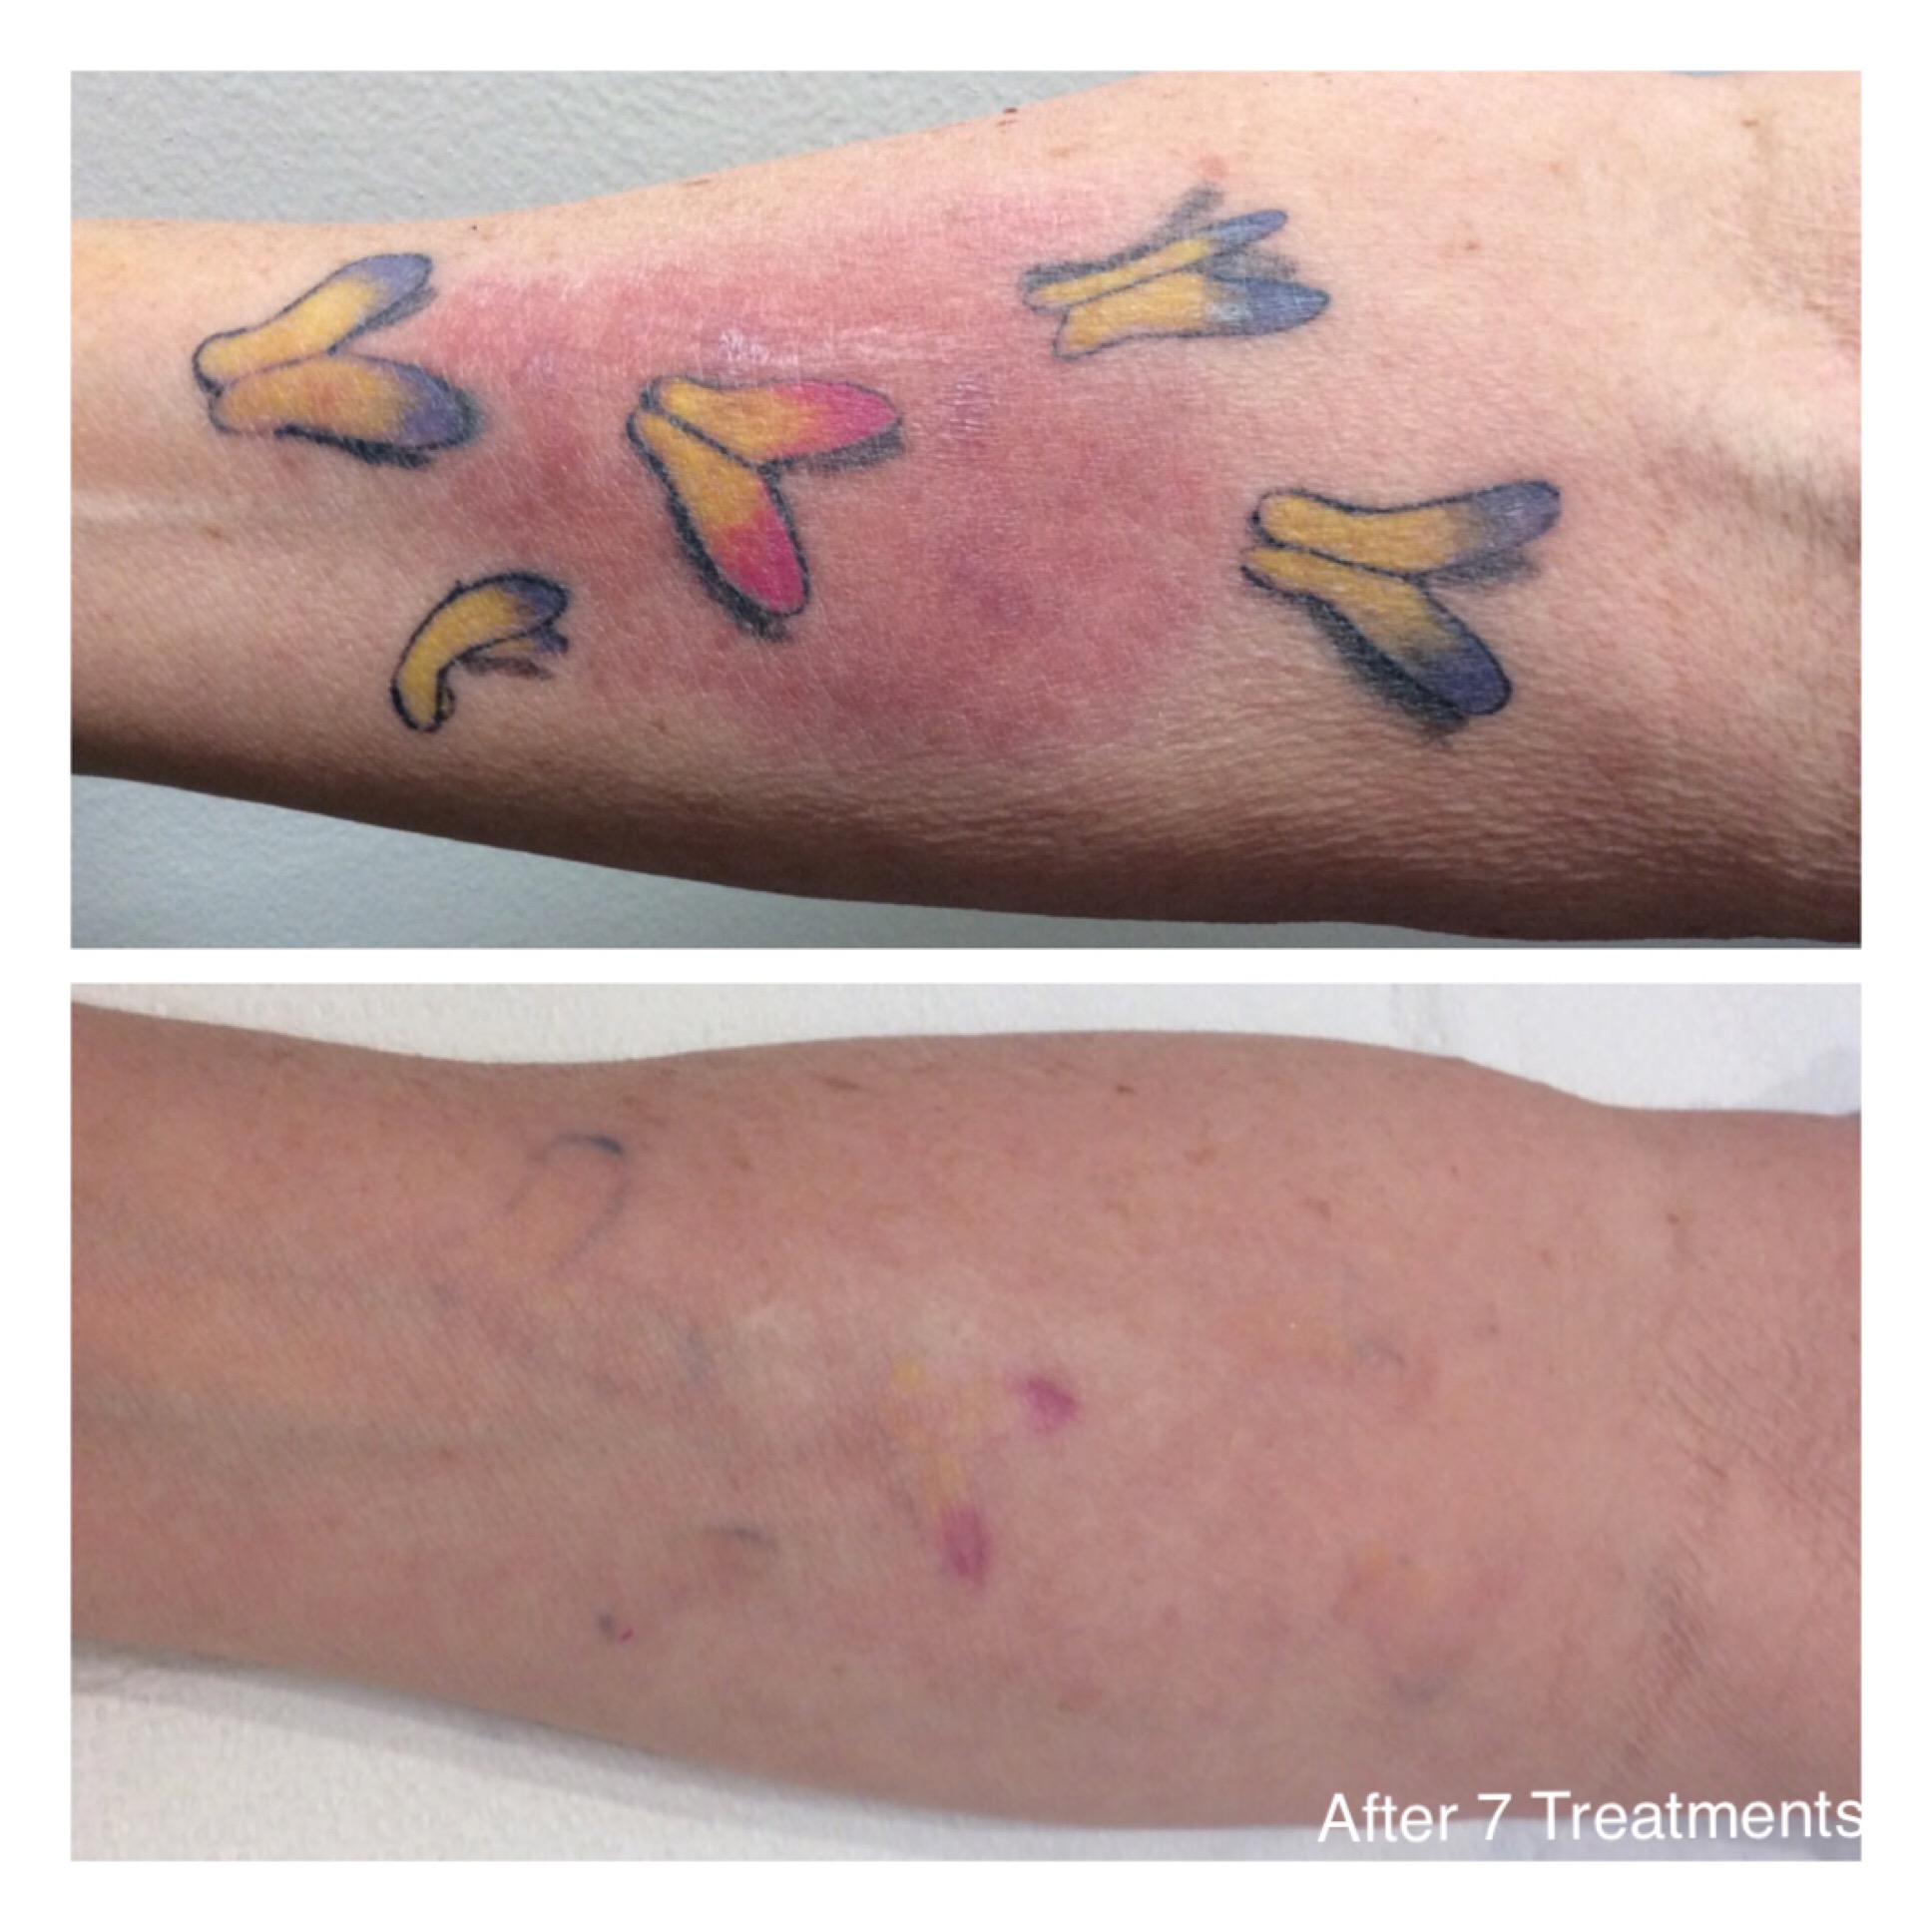 Before and after top and bottom of tattoo removal for butterflies tattoo on someone's inner forearm